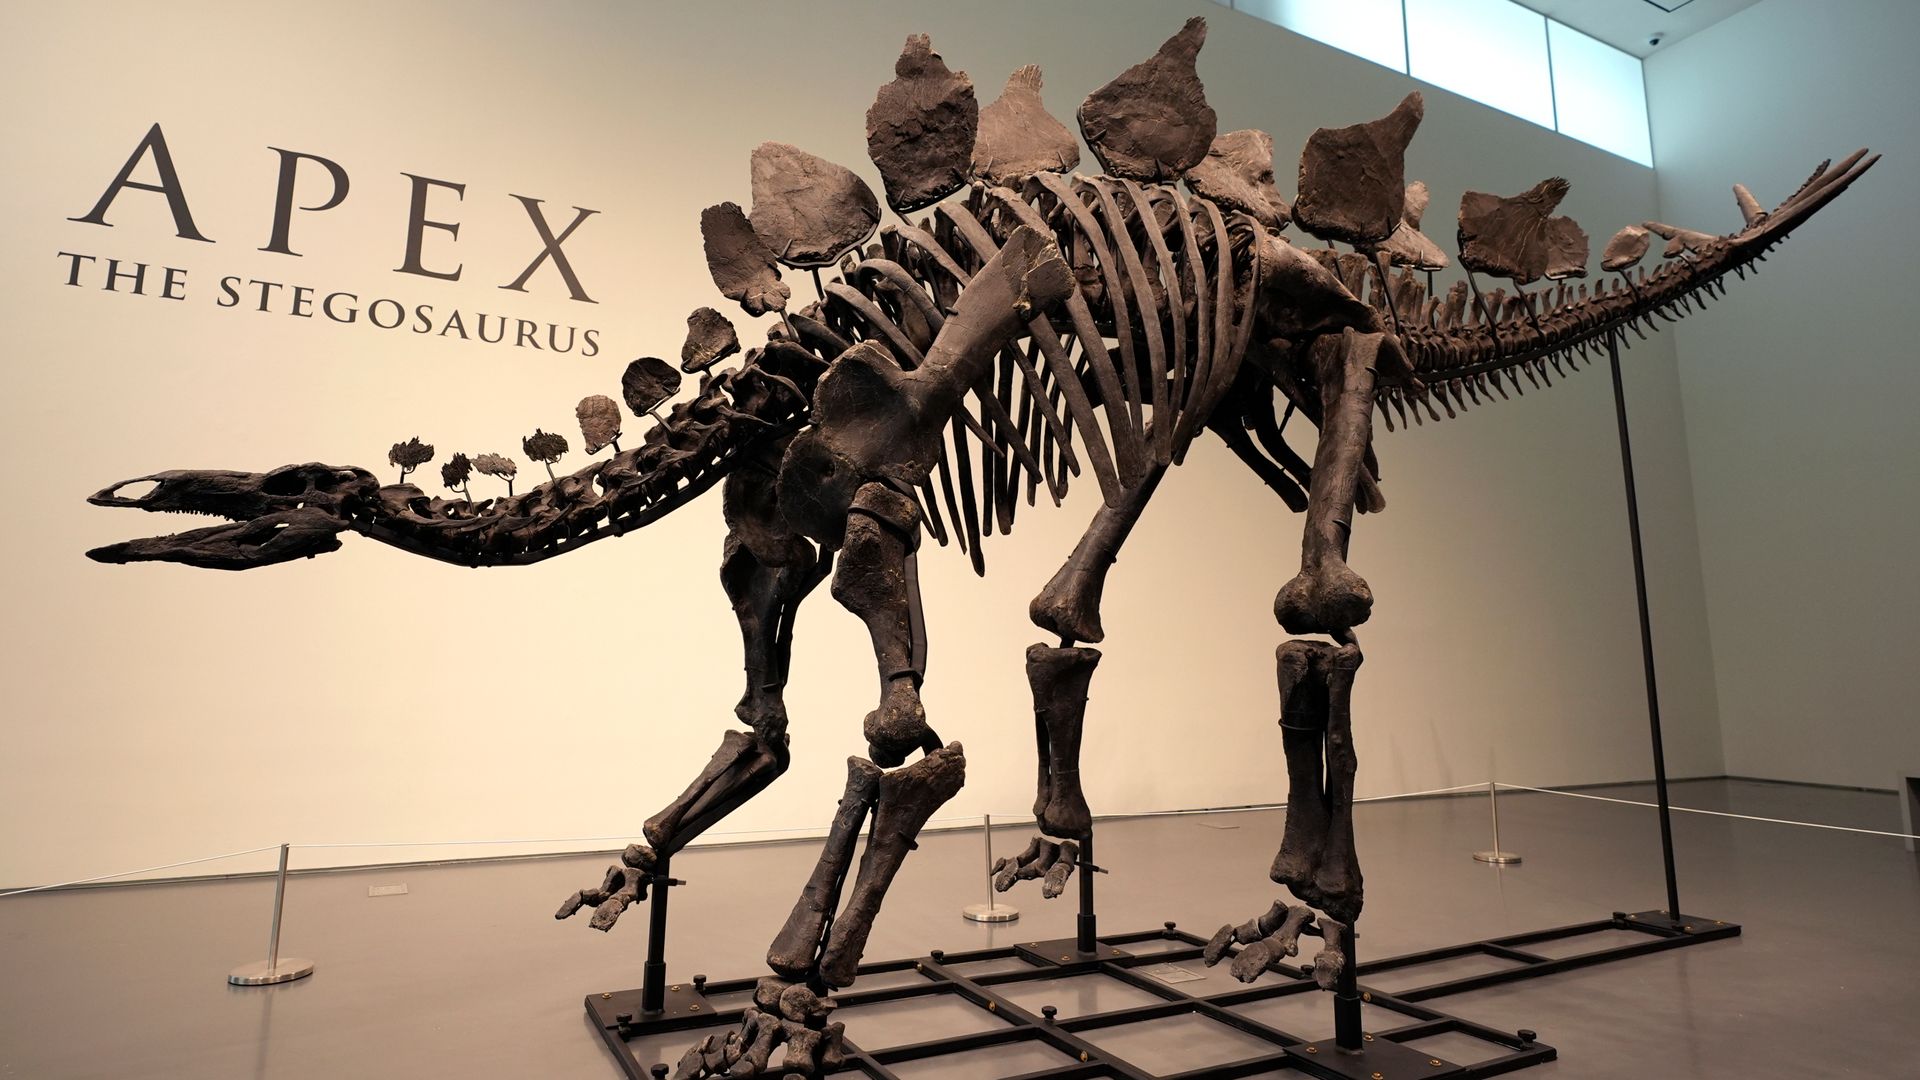 Nearly complete dinosaur fossil sells for record £34m